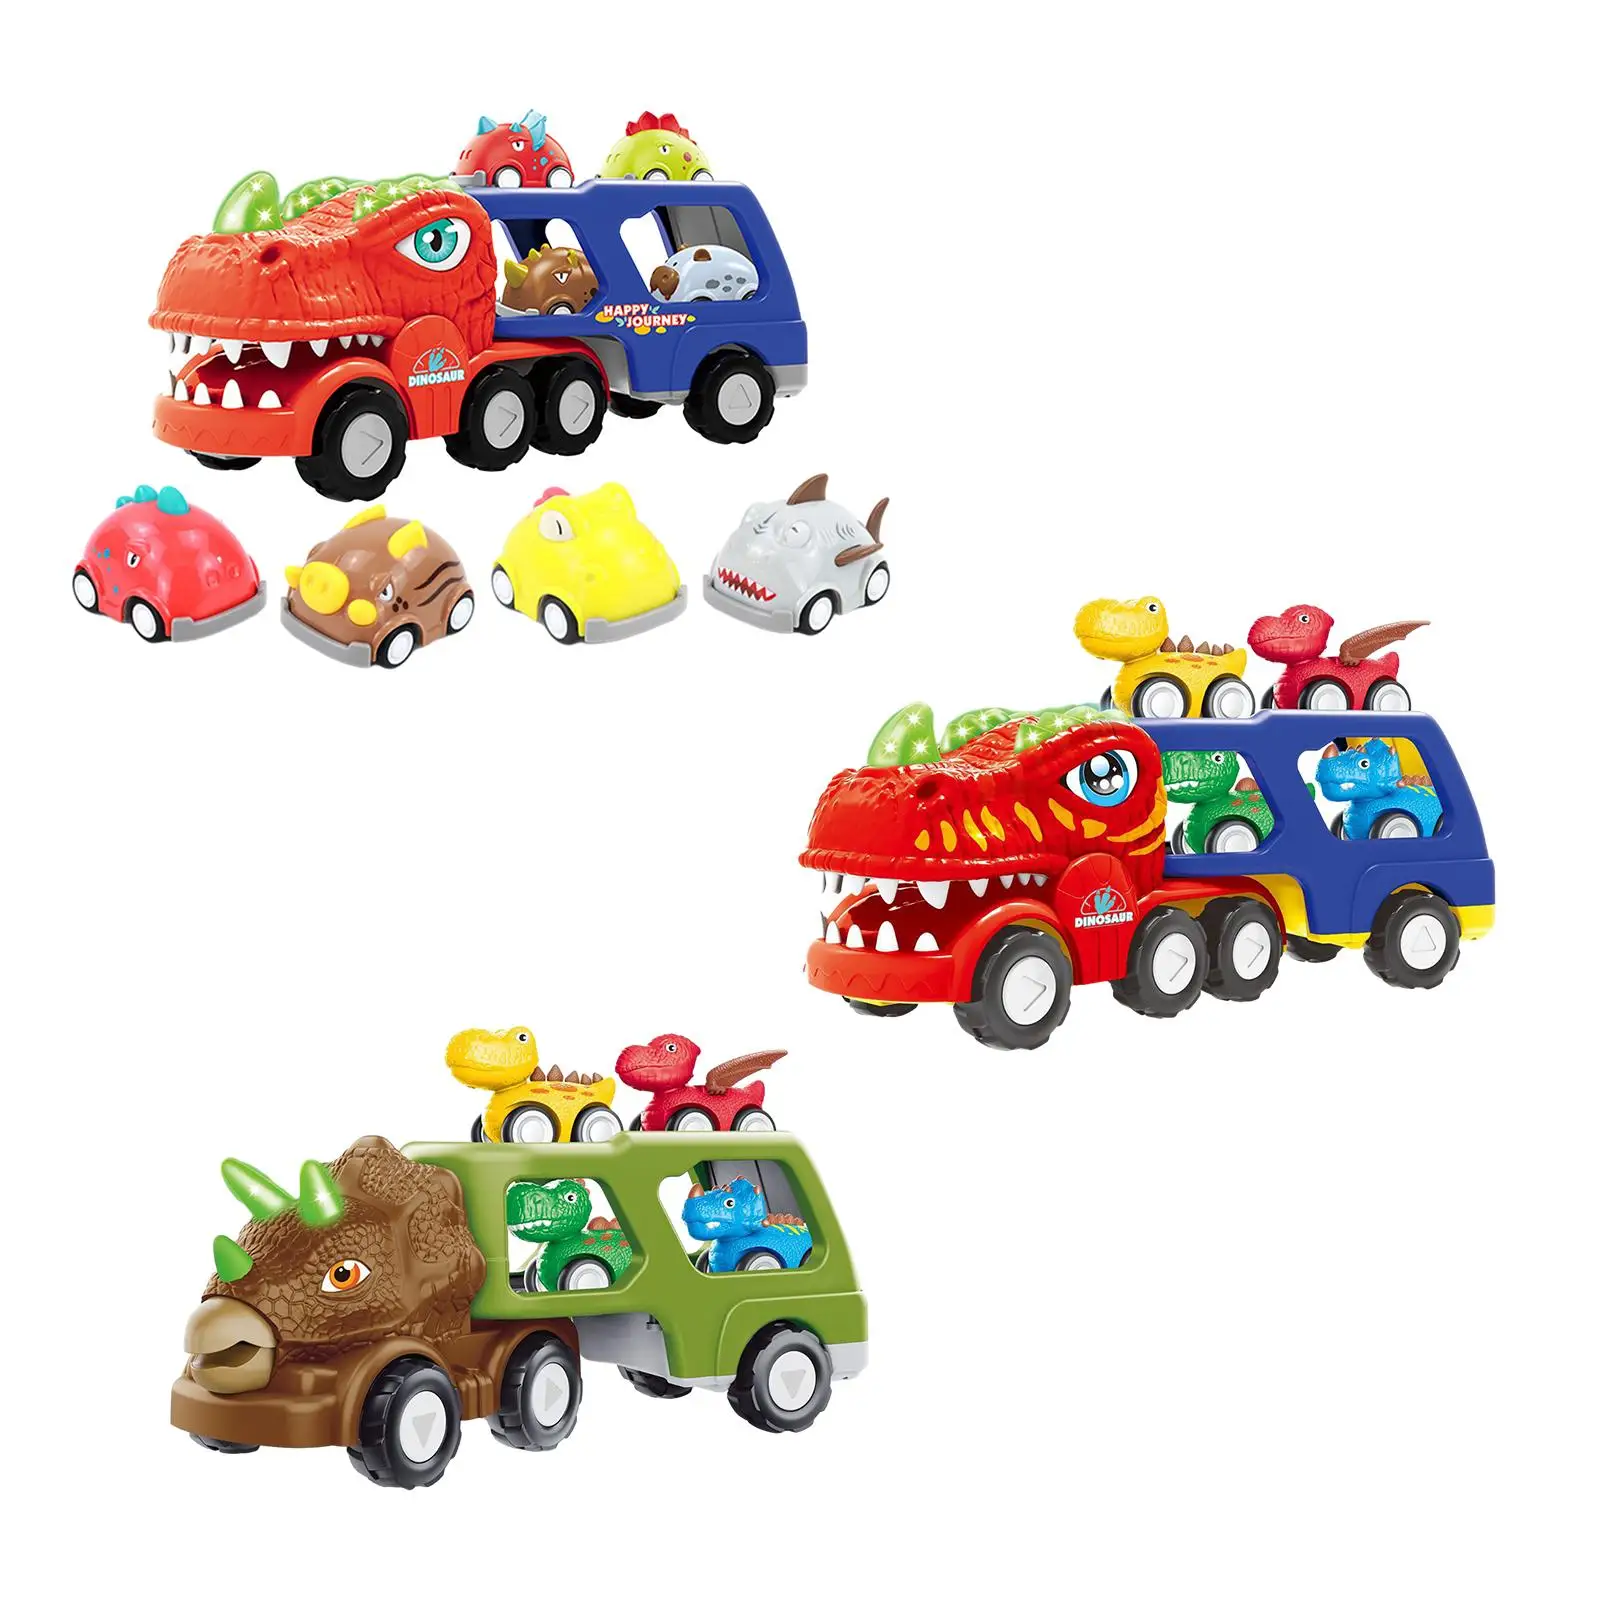 

Dinosaur Truck Toy Funny Storage Function Transport Truck Carrier for Kids Party Supplies Babies Preschool Birthday Gift